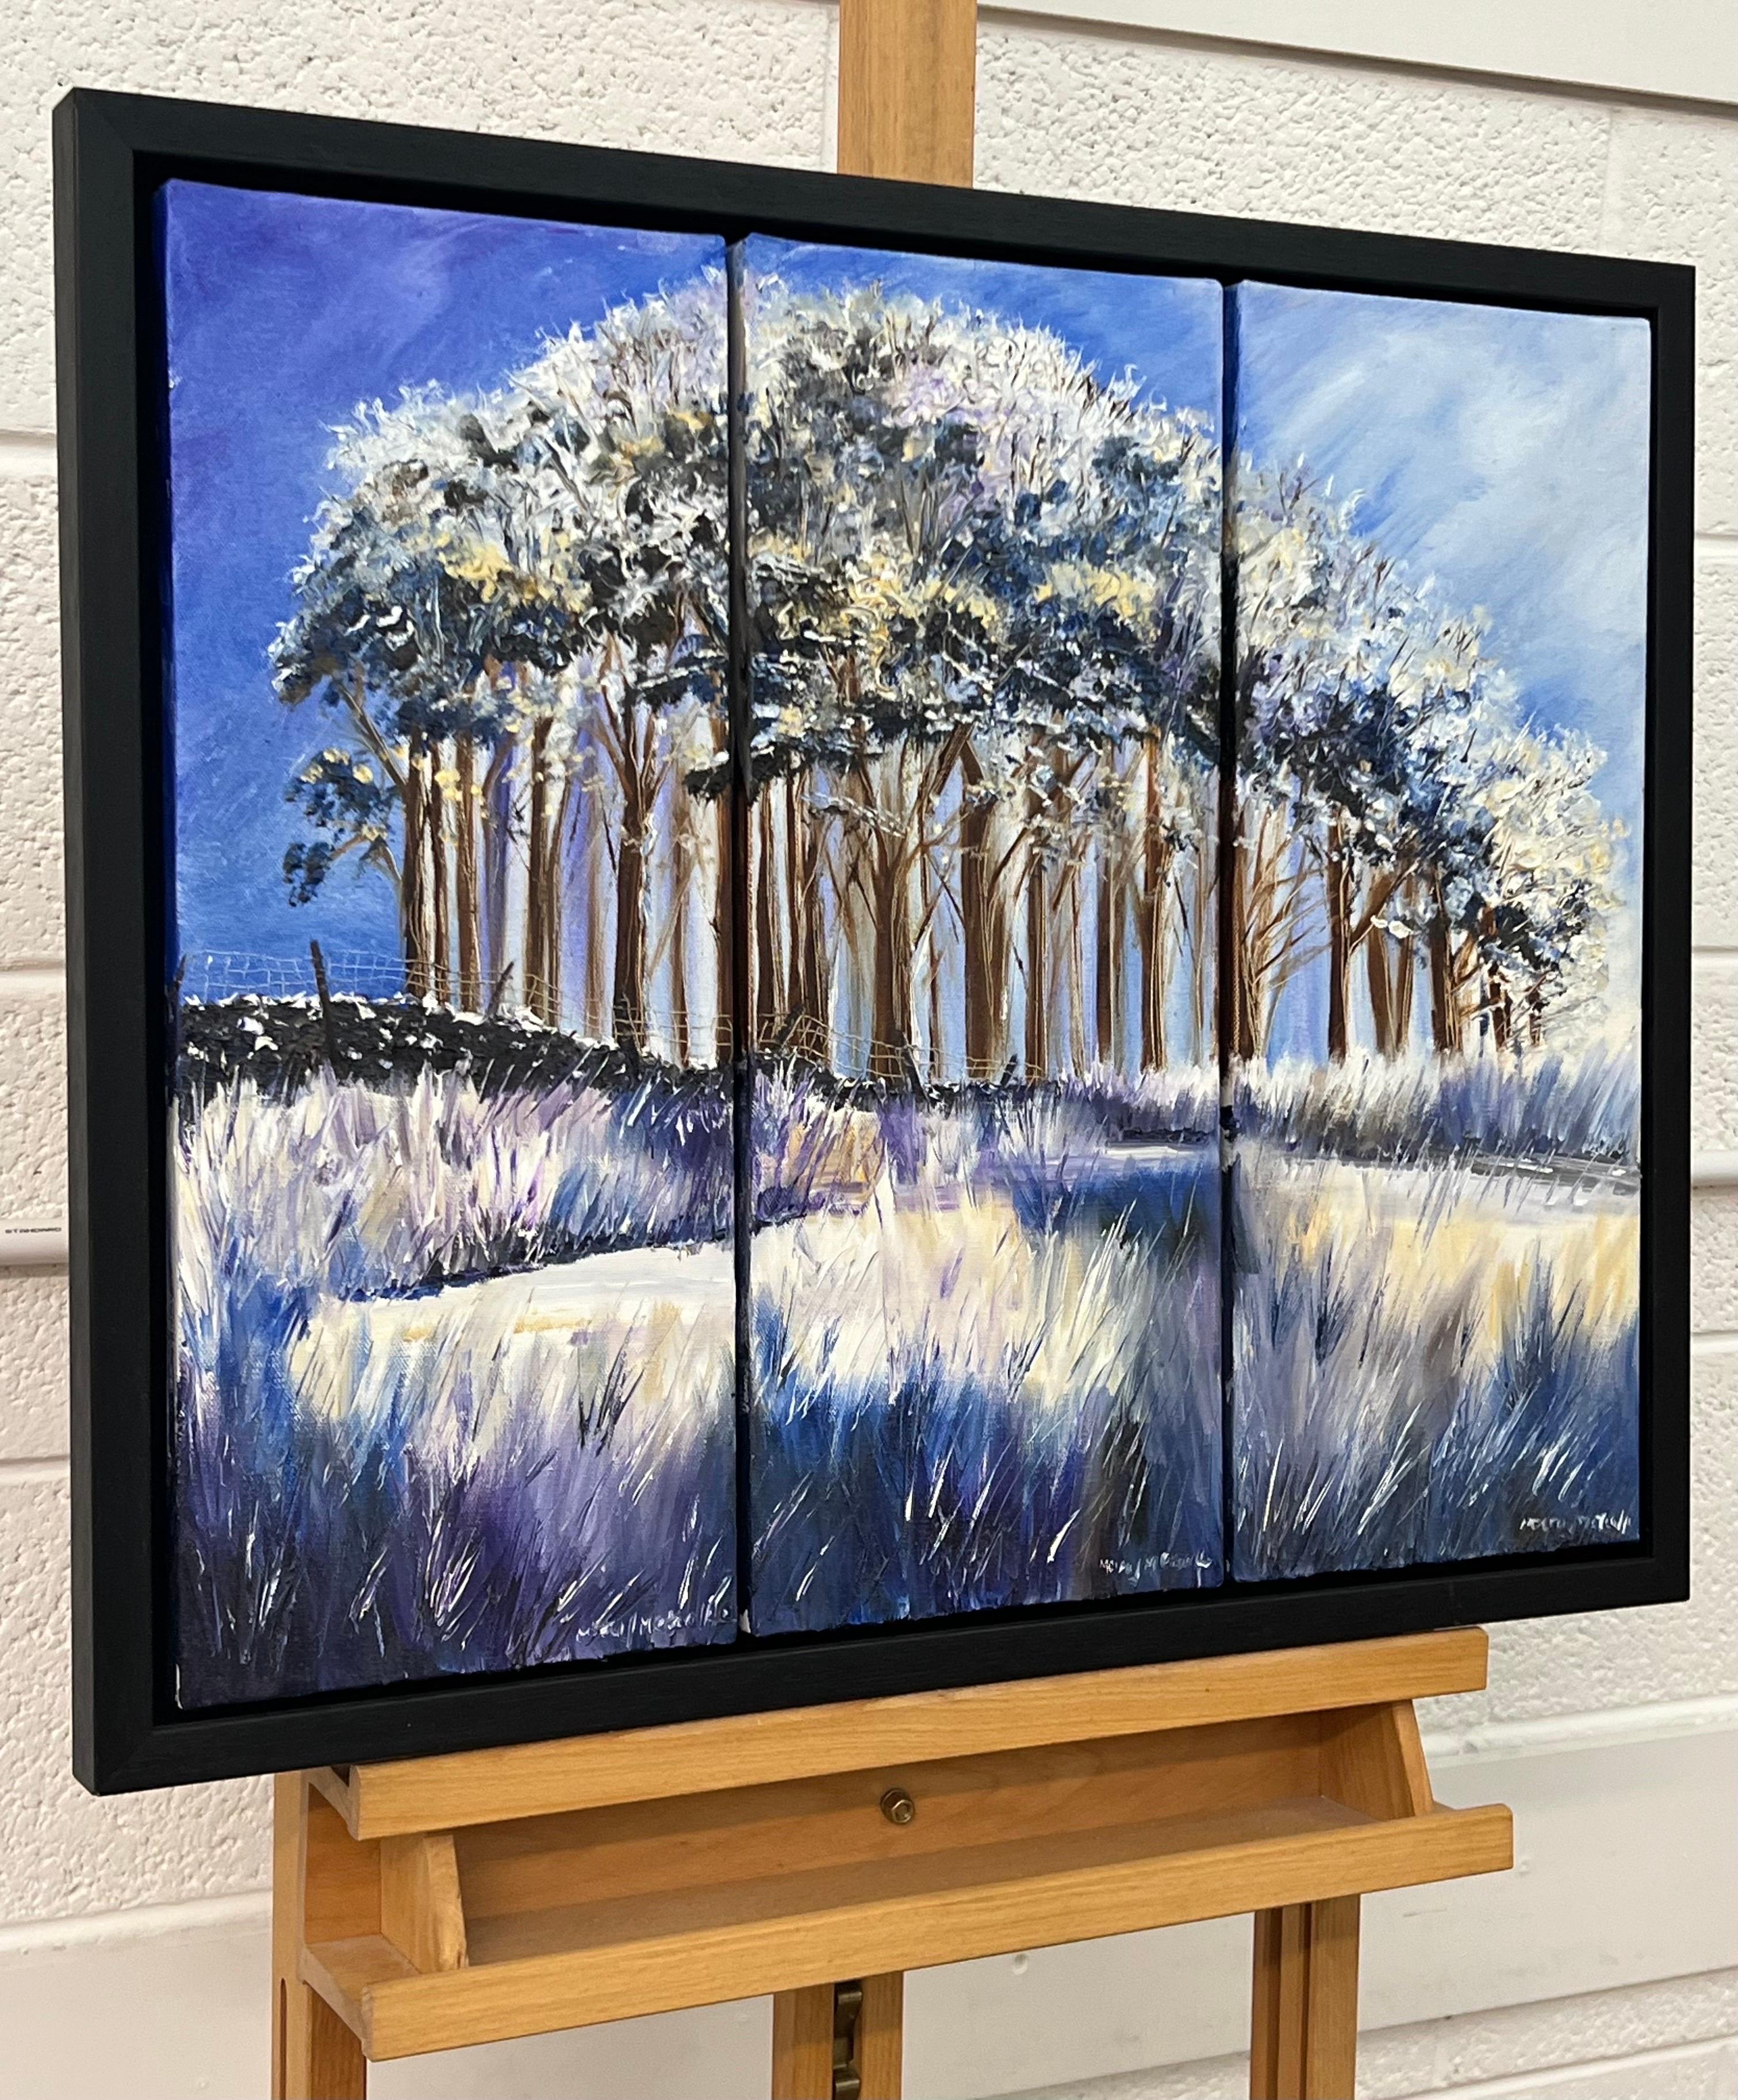 Winter Trees in the Yorkshire Dales Sunshine - Abstract Landscape Oil Painting by British Artist 

Art measures 24 x 18 (triptych of three 8 x 18 inch canvasses) 
Frame measures 26 x 22 inches 

Using blues, lilacs and whites, this is an abstracted